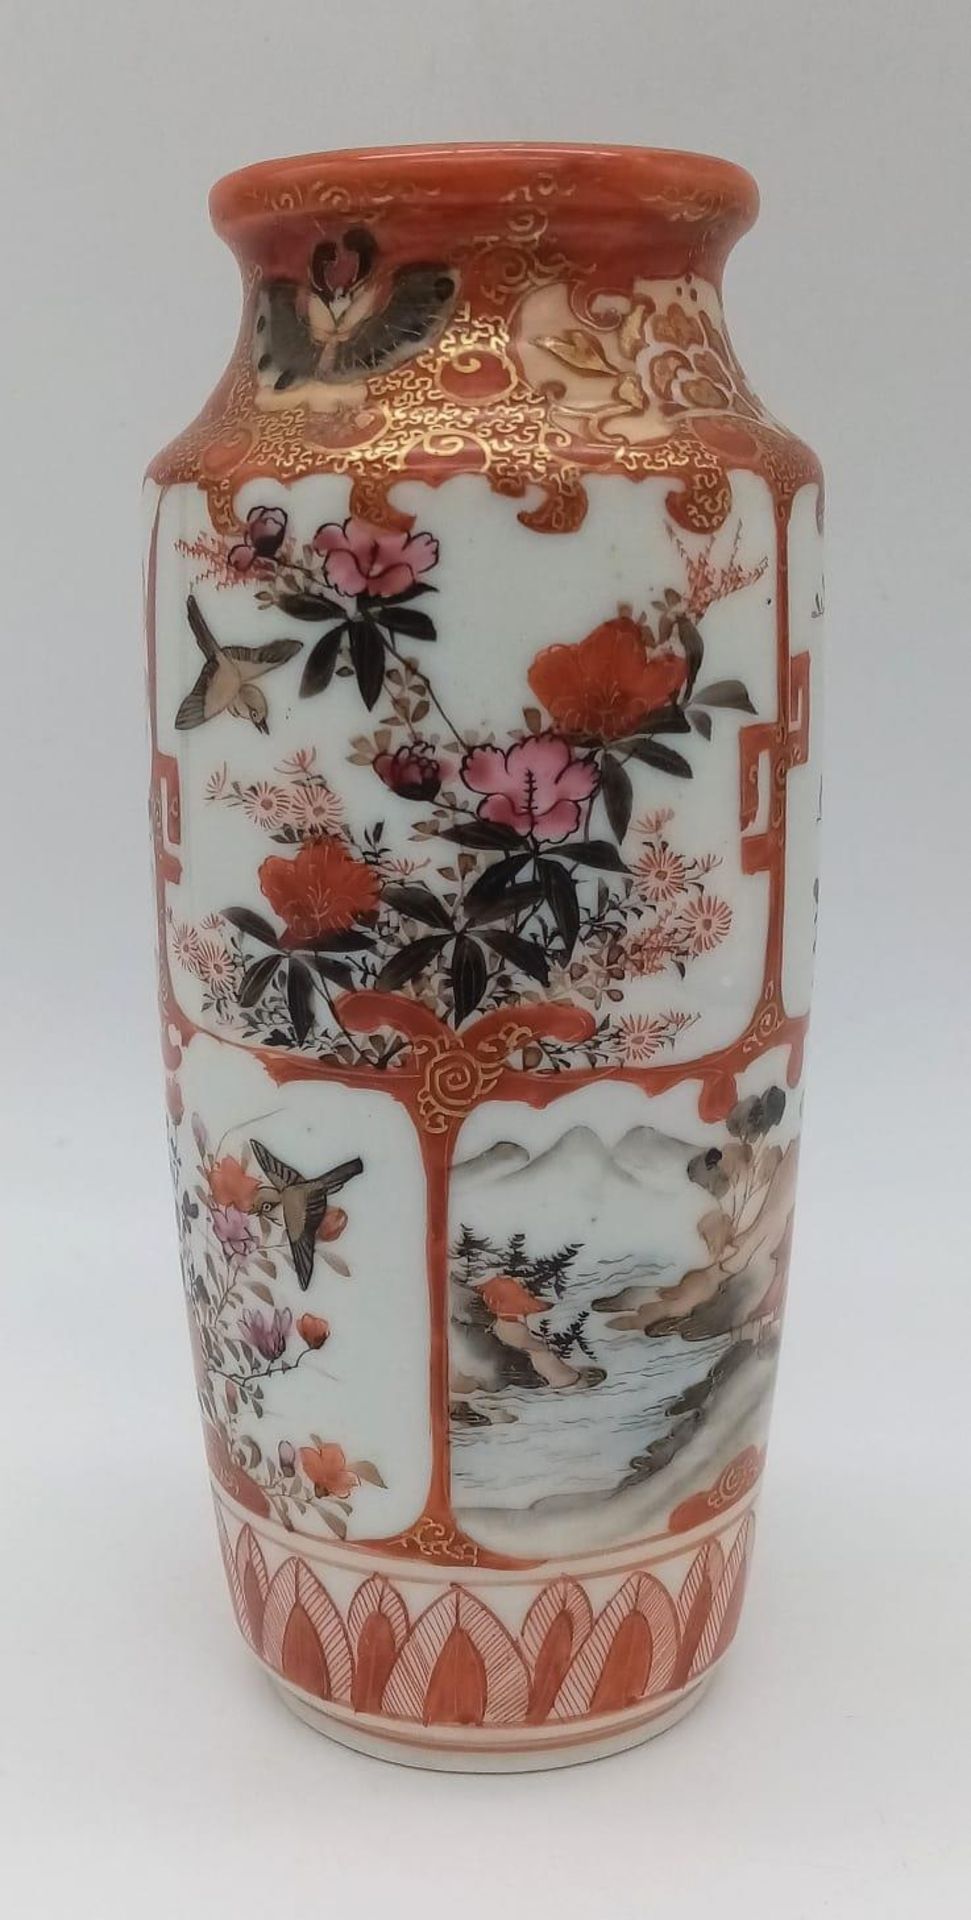 A SMALL SATSUMA VASE WITH ORIENTAL THEMED PATTERNS . 17cms TALL